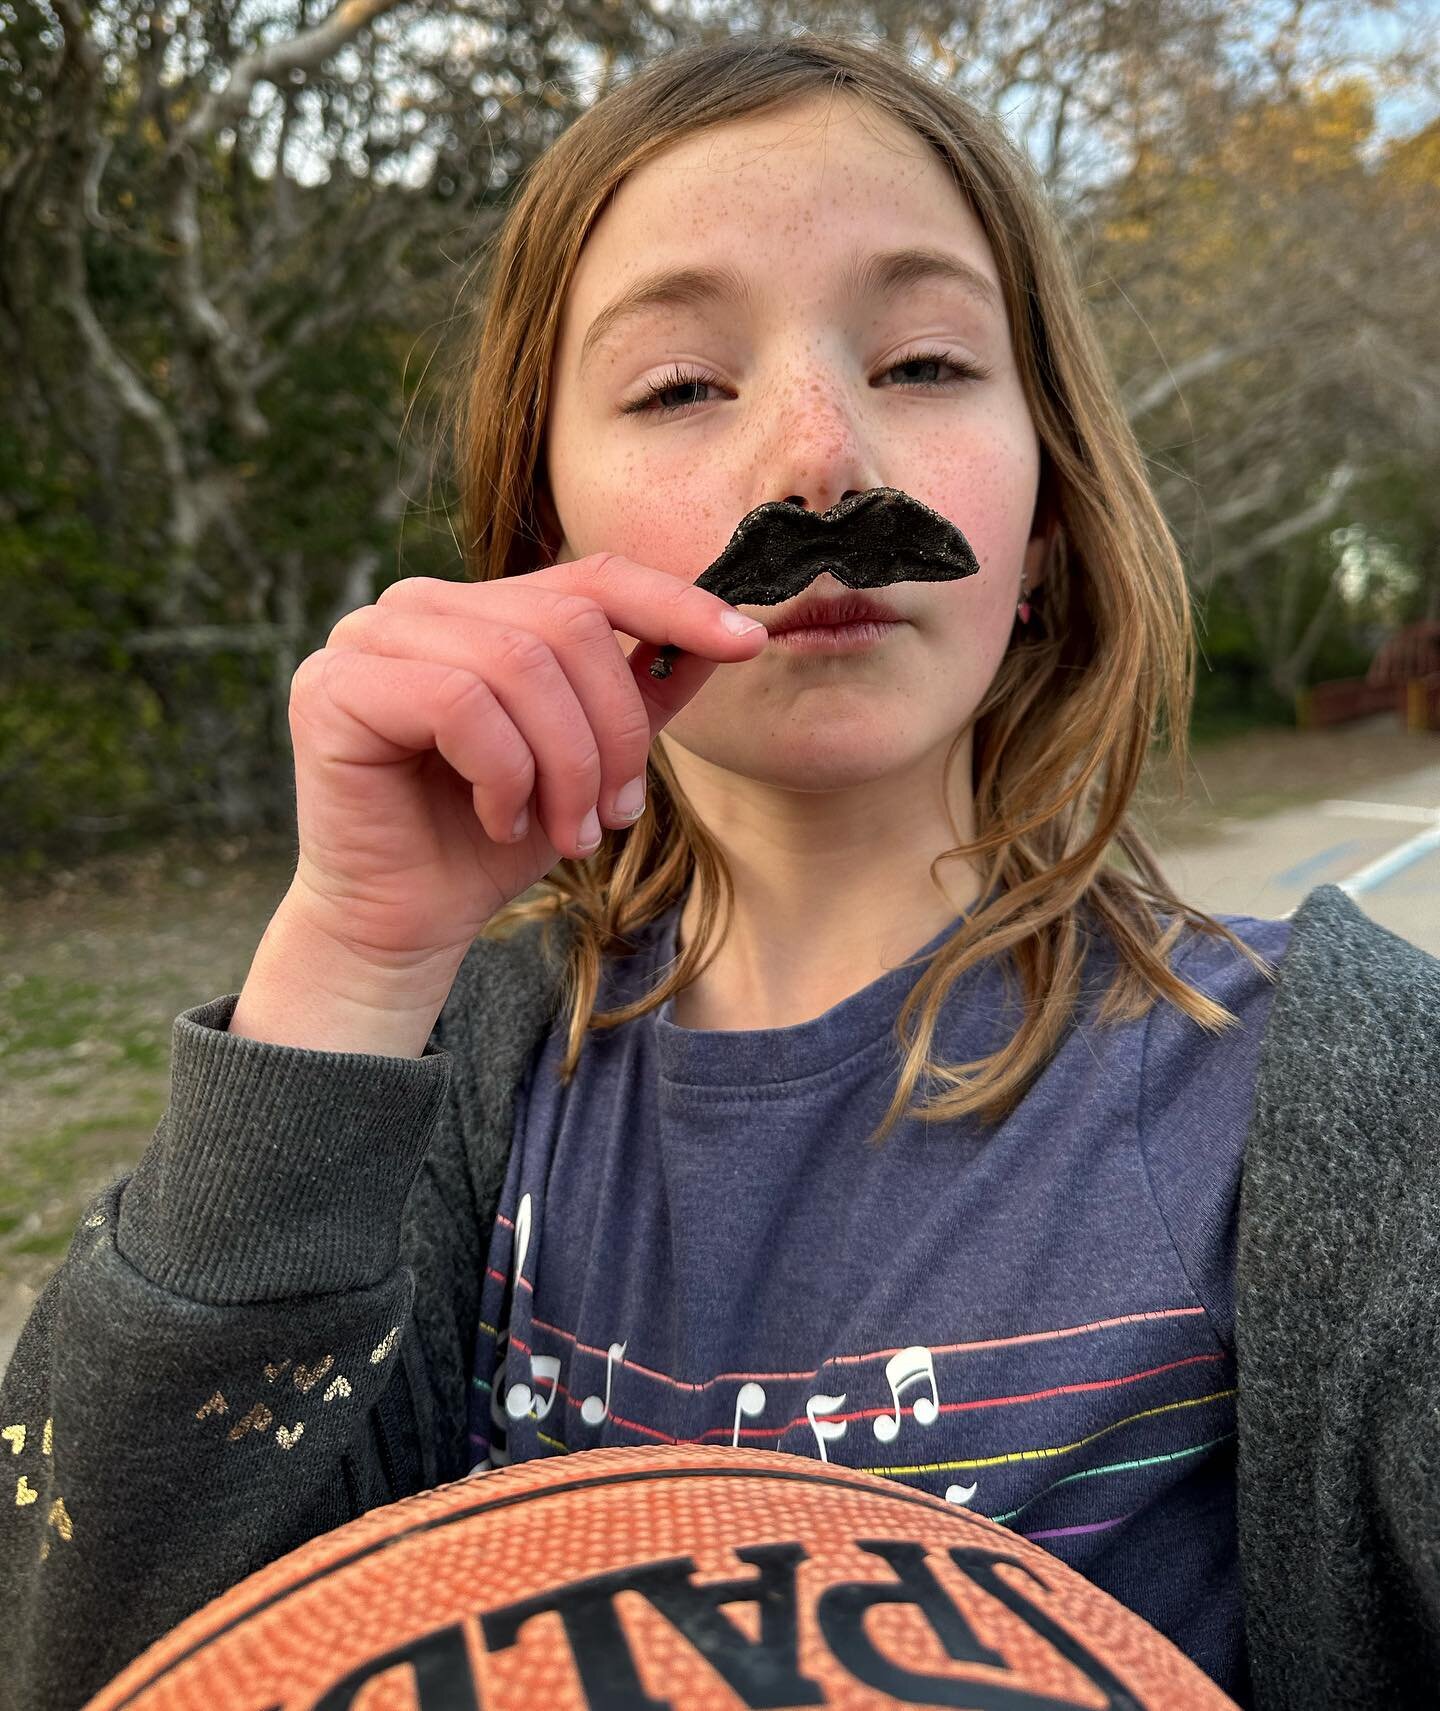 Take a moment to appreciate the ironic mustaches in your life. 🥸